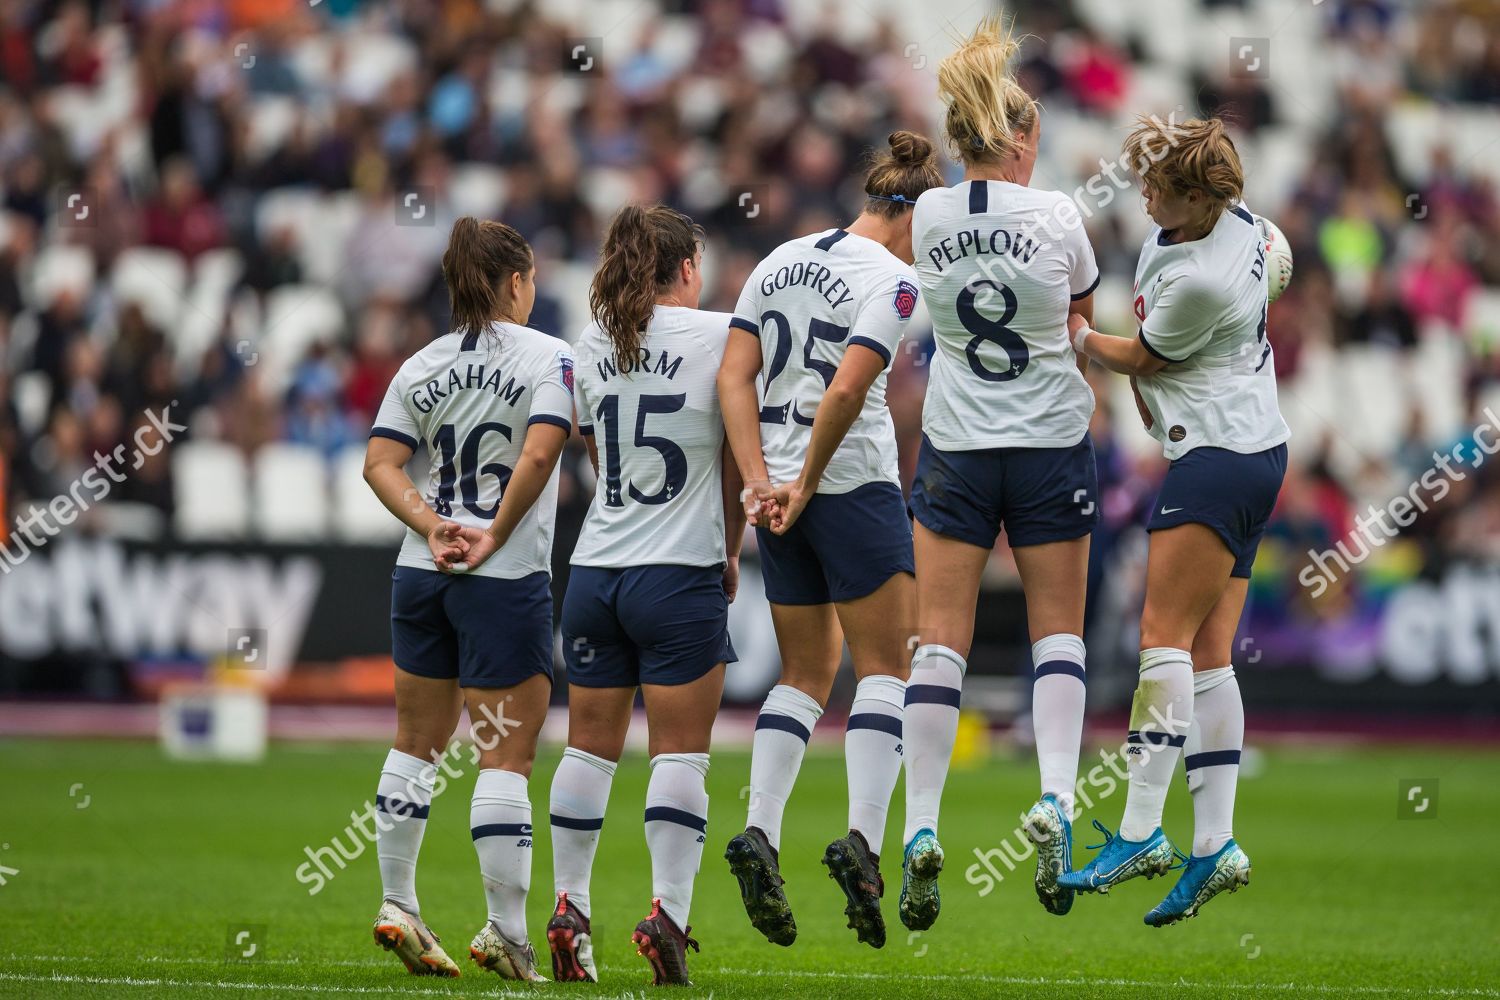 Wall Free Kick During Fa Womens Super Editorial Stock Photo Stock Image Shutterstock